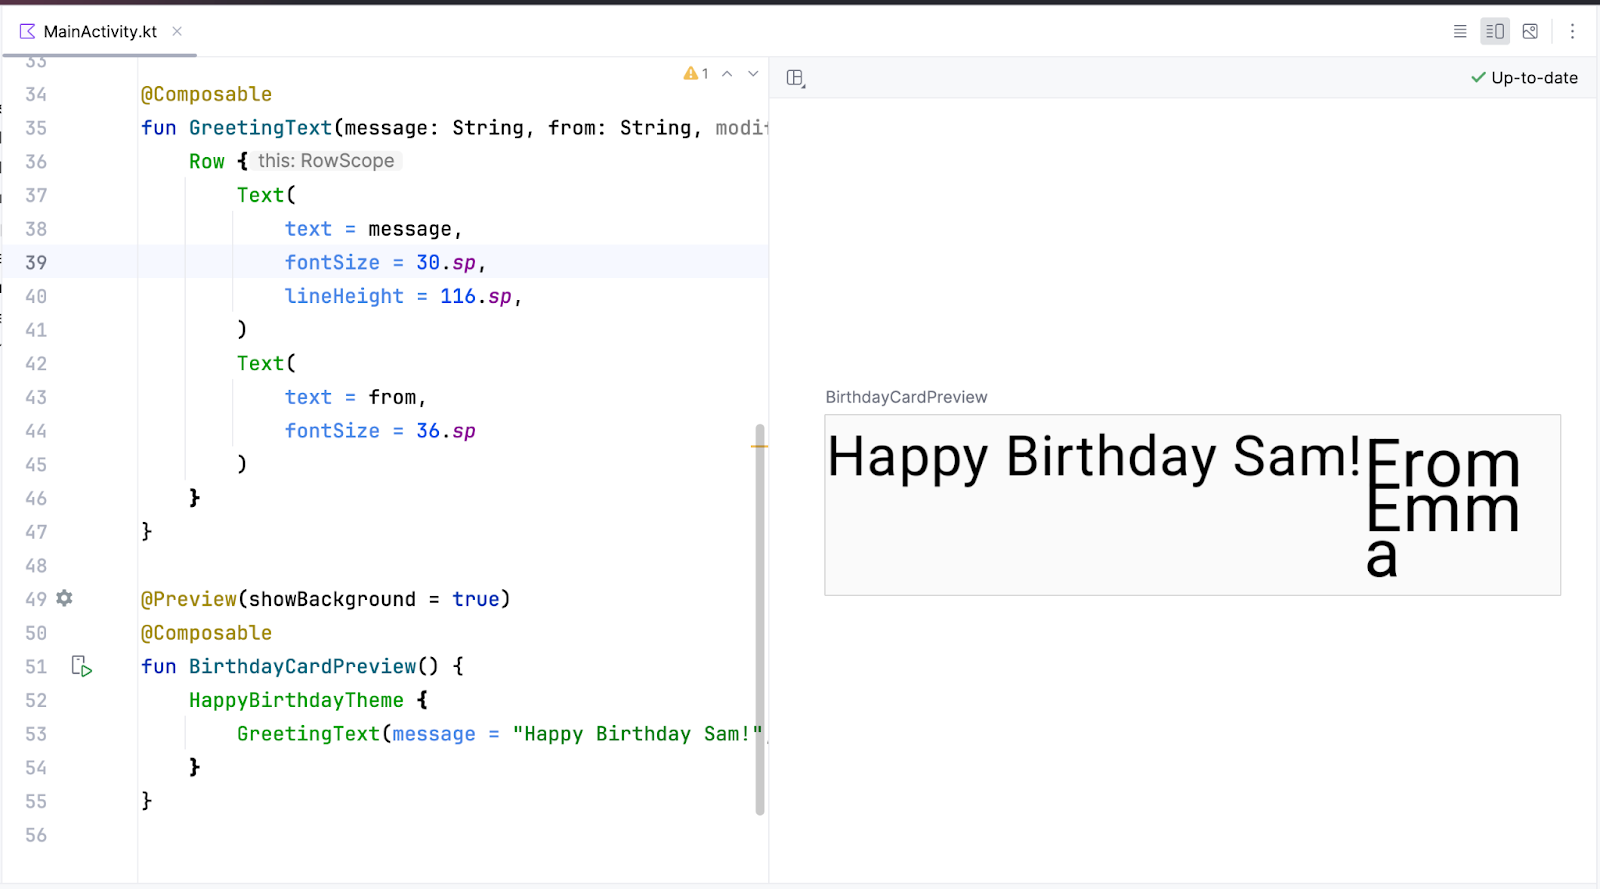 Birthday greeting and signature are displayed next to each other in a row.